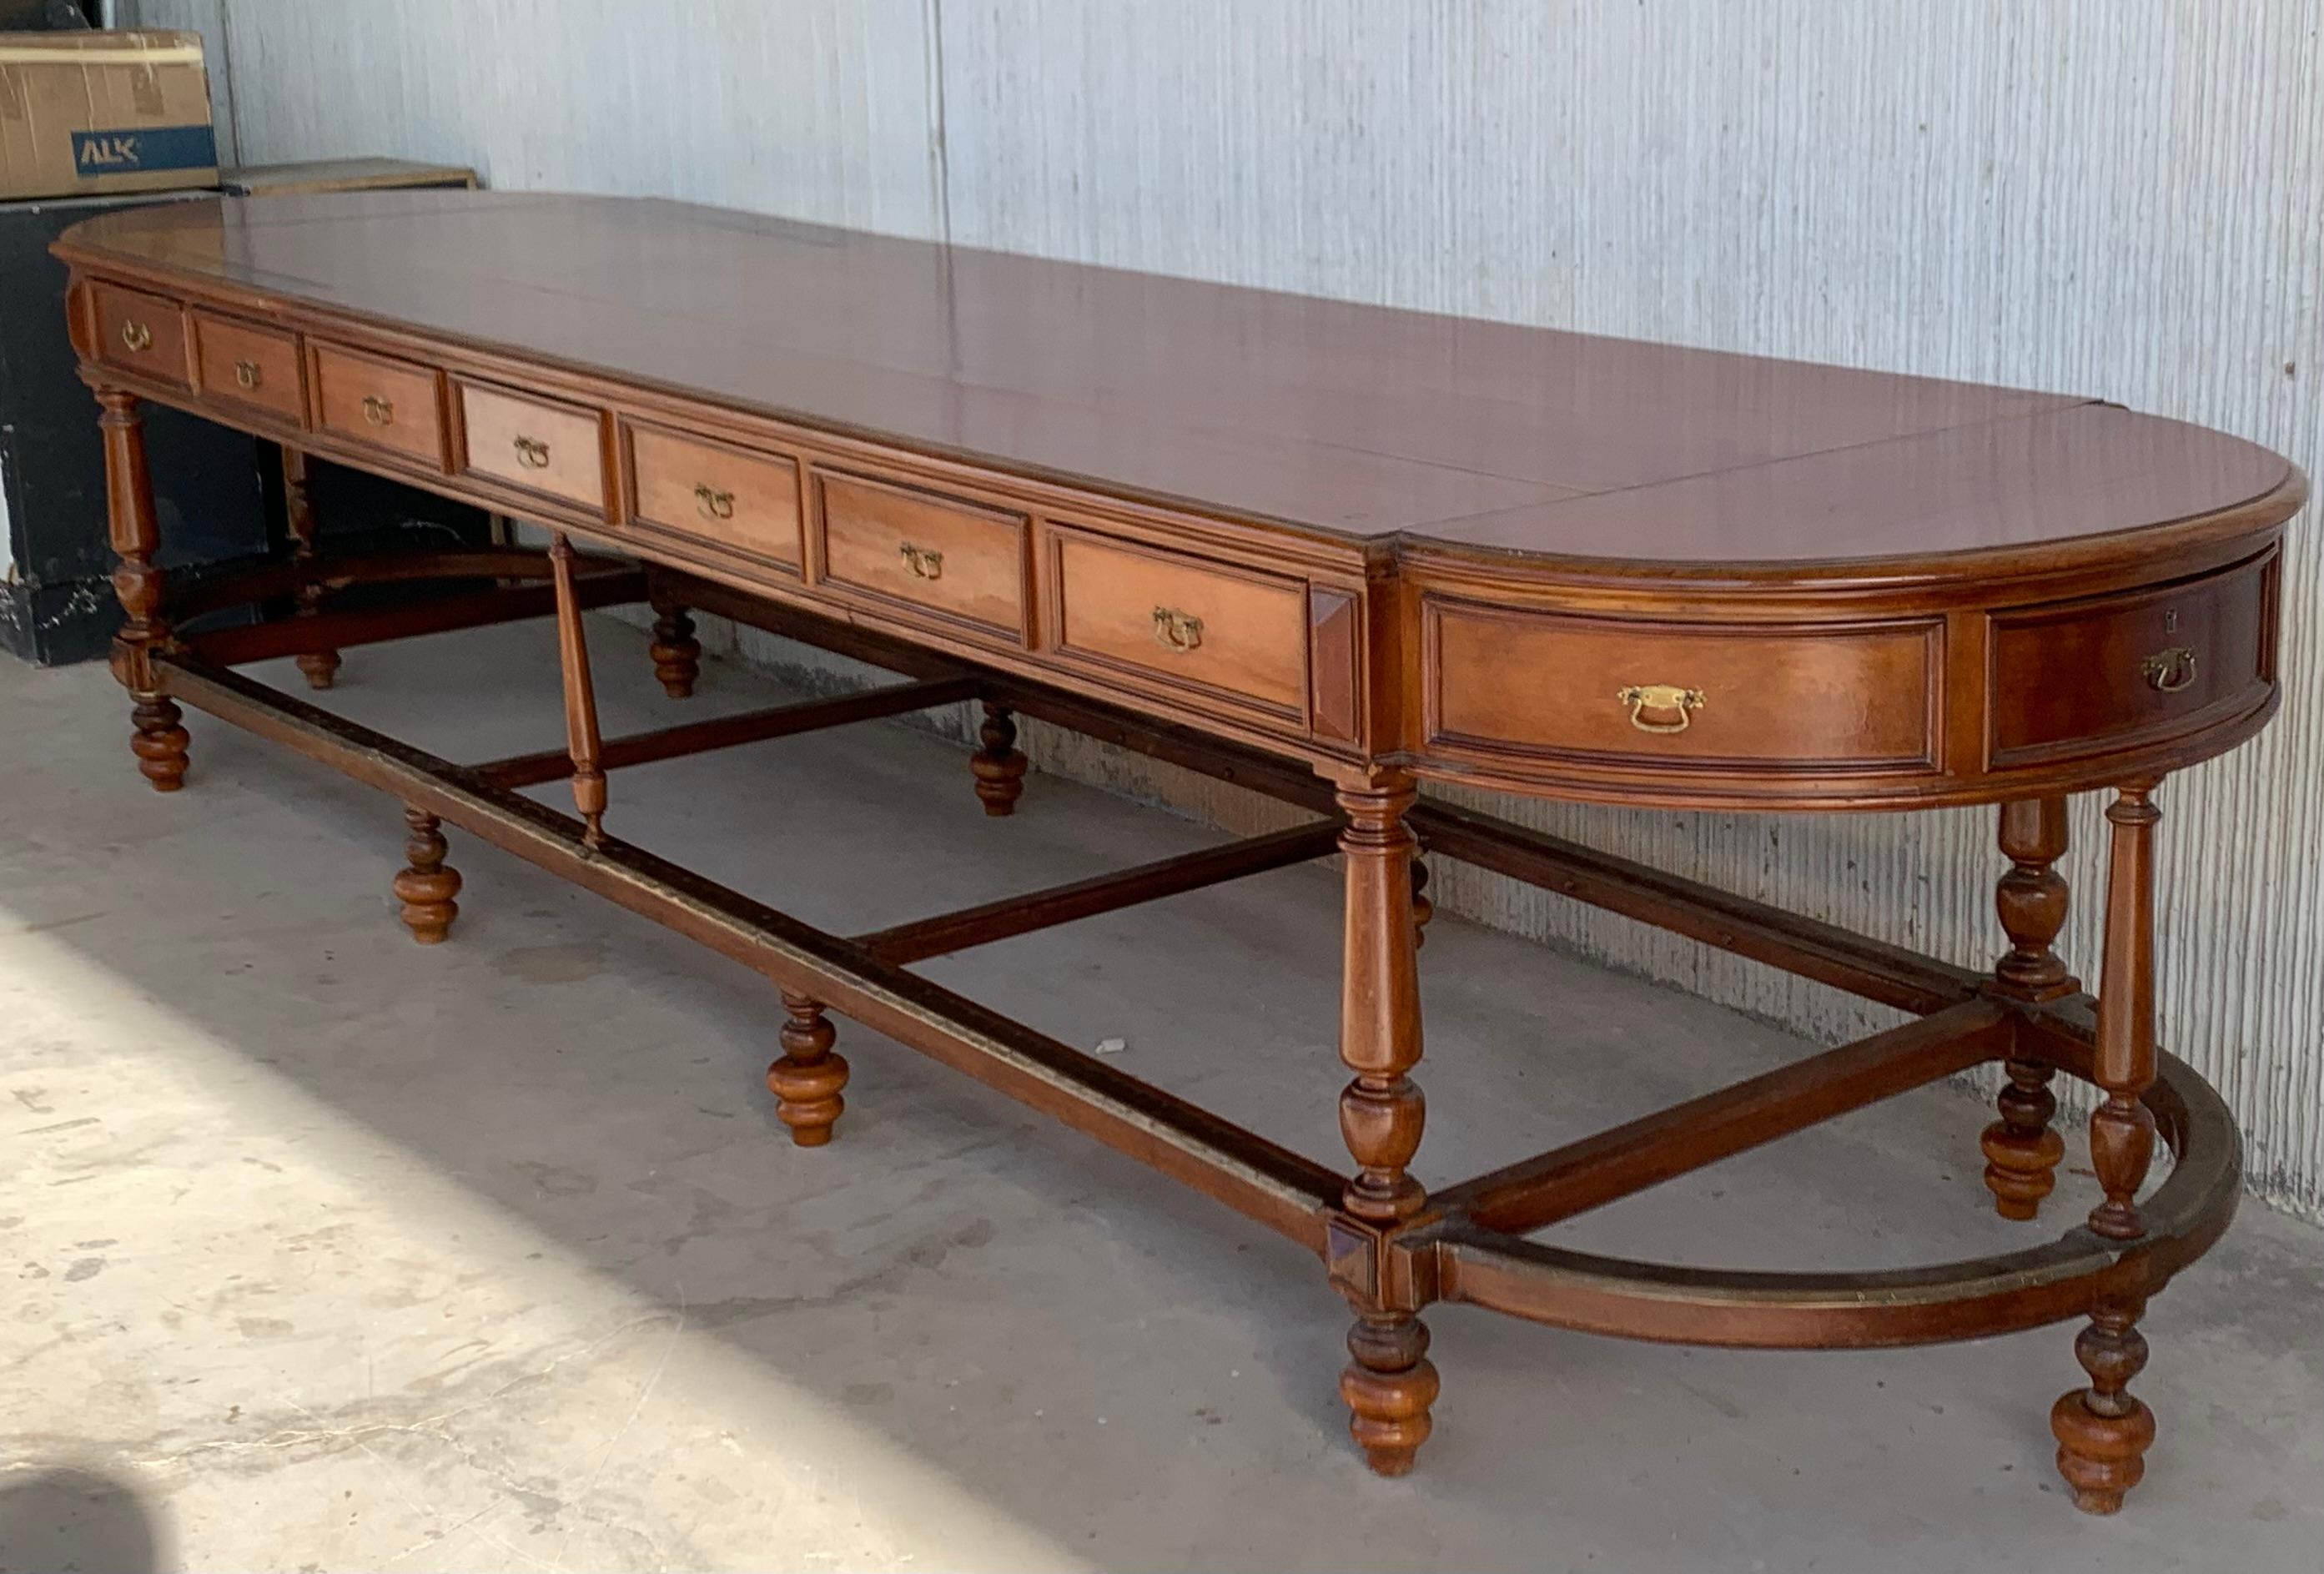 Spanish Colonial 12 Foot Oval Center Table with Drawers in Both Sides, 20th Century For Sale